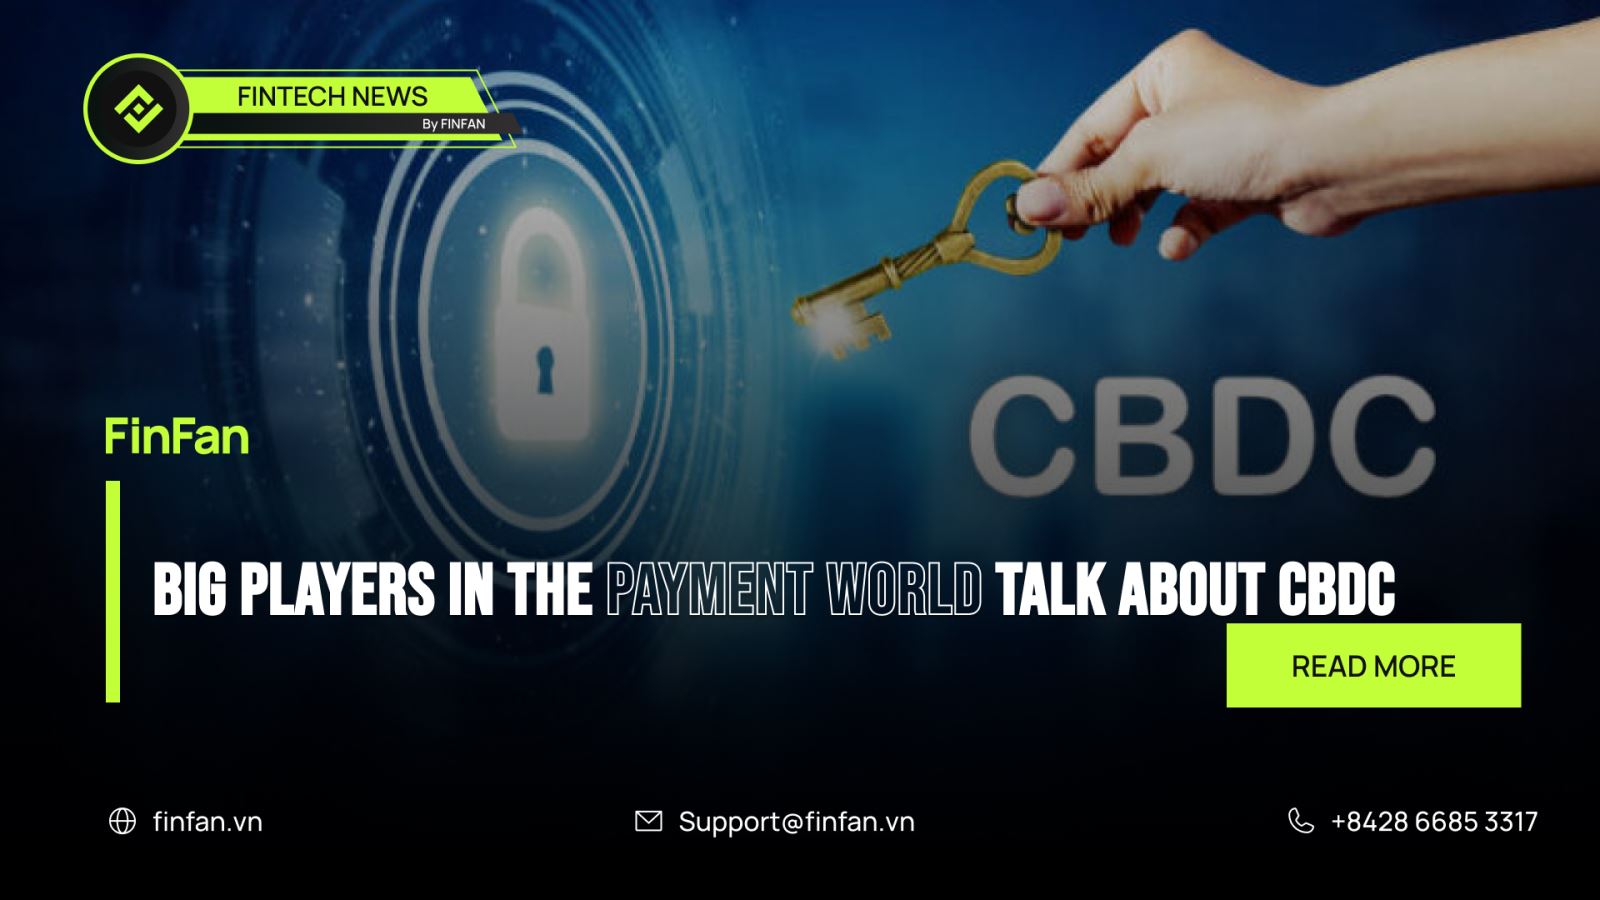 Listen to the big players in the payment world talk about the potential as well as the disadvantages of CBDC